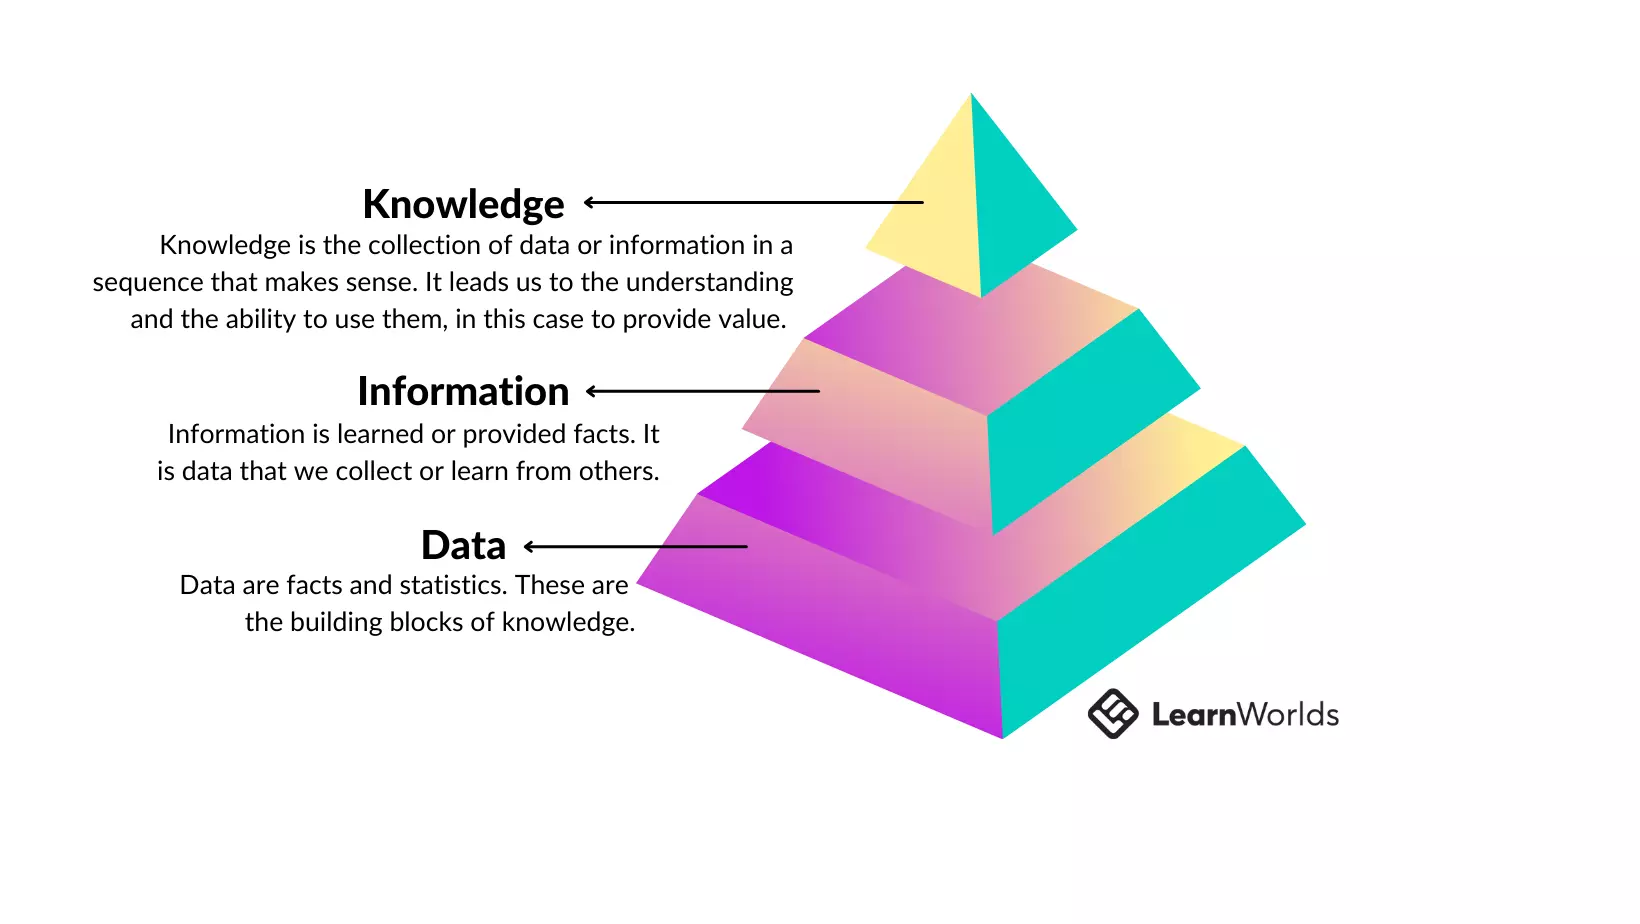 The pyramid of Knowledge. Knowledge is on top, the middle layer is Information and Data sits on the bottom.